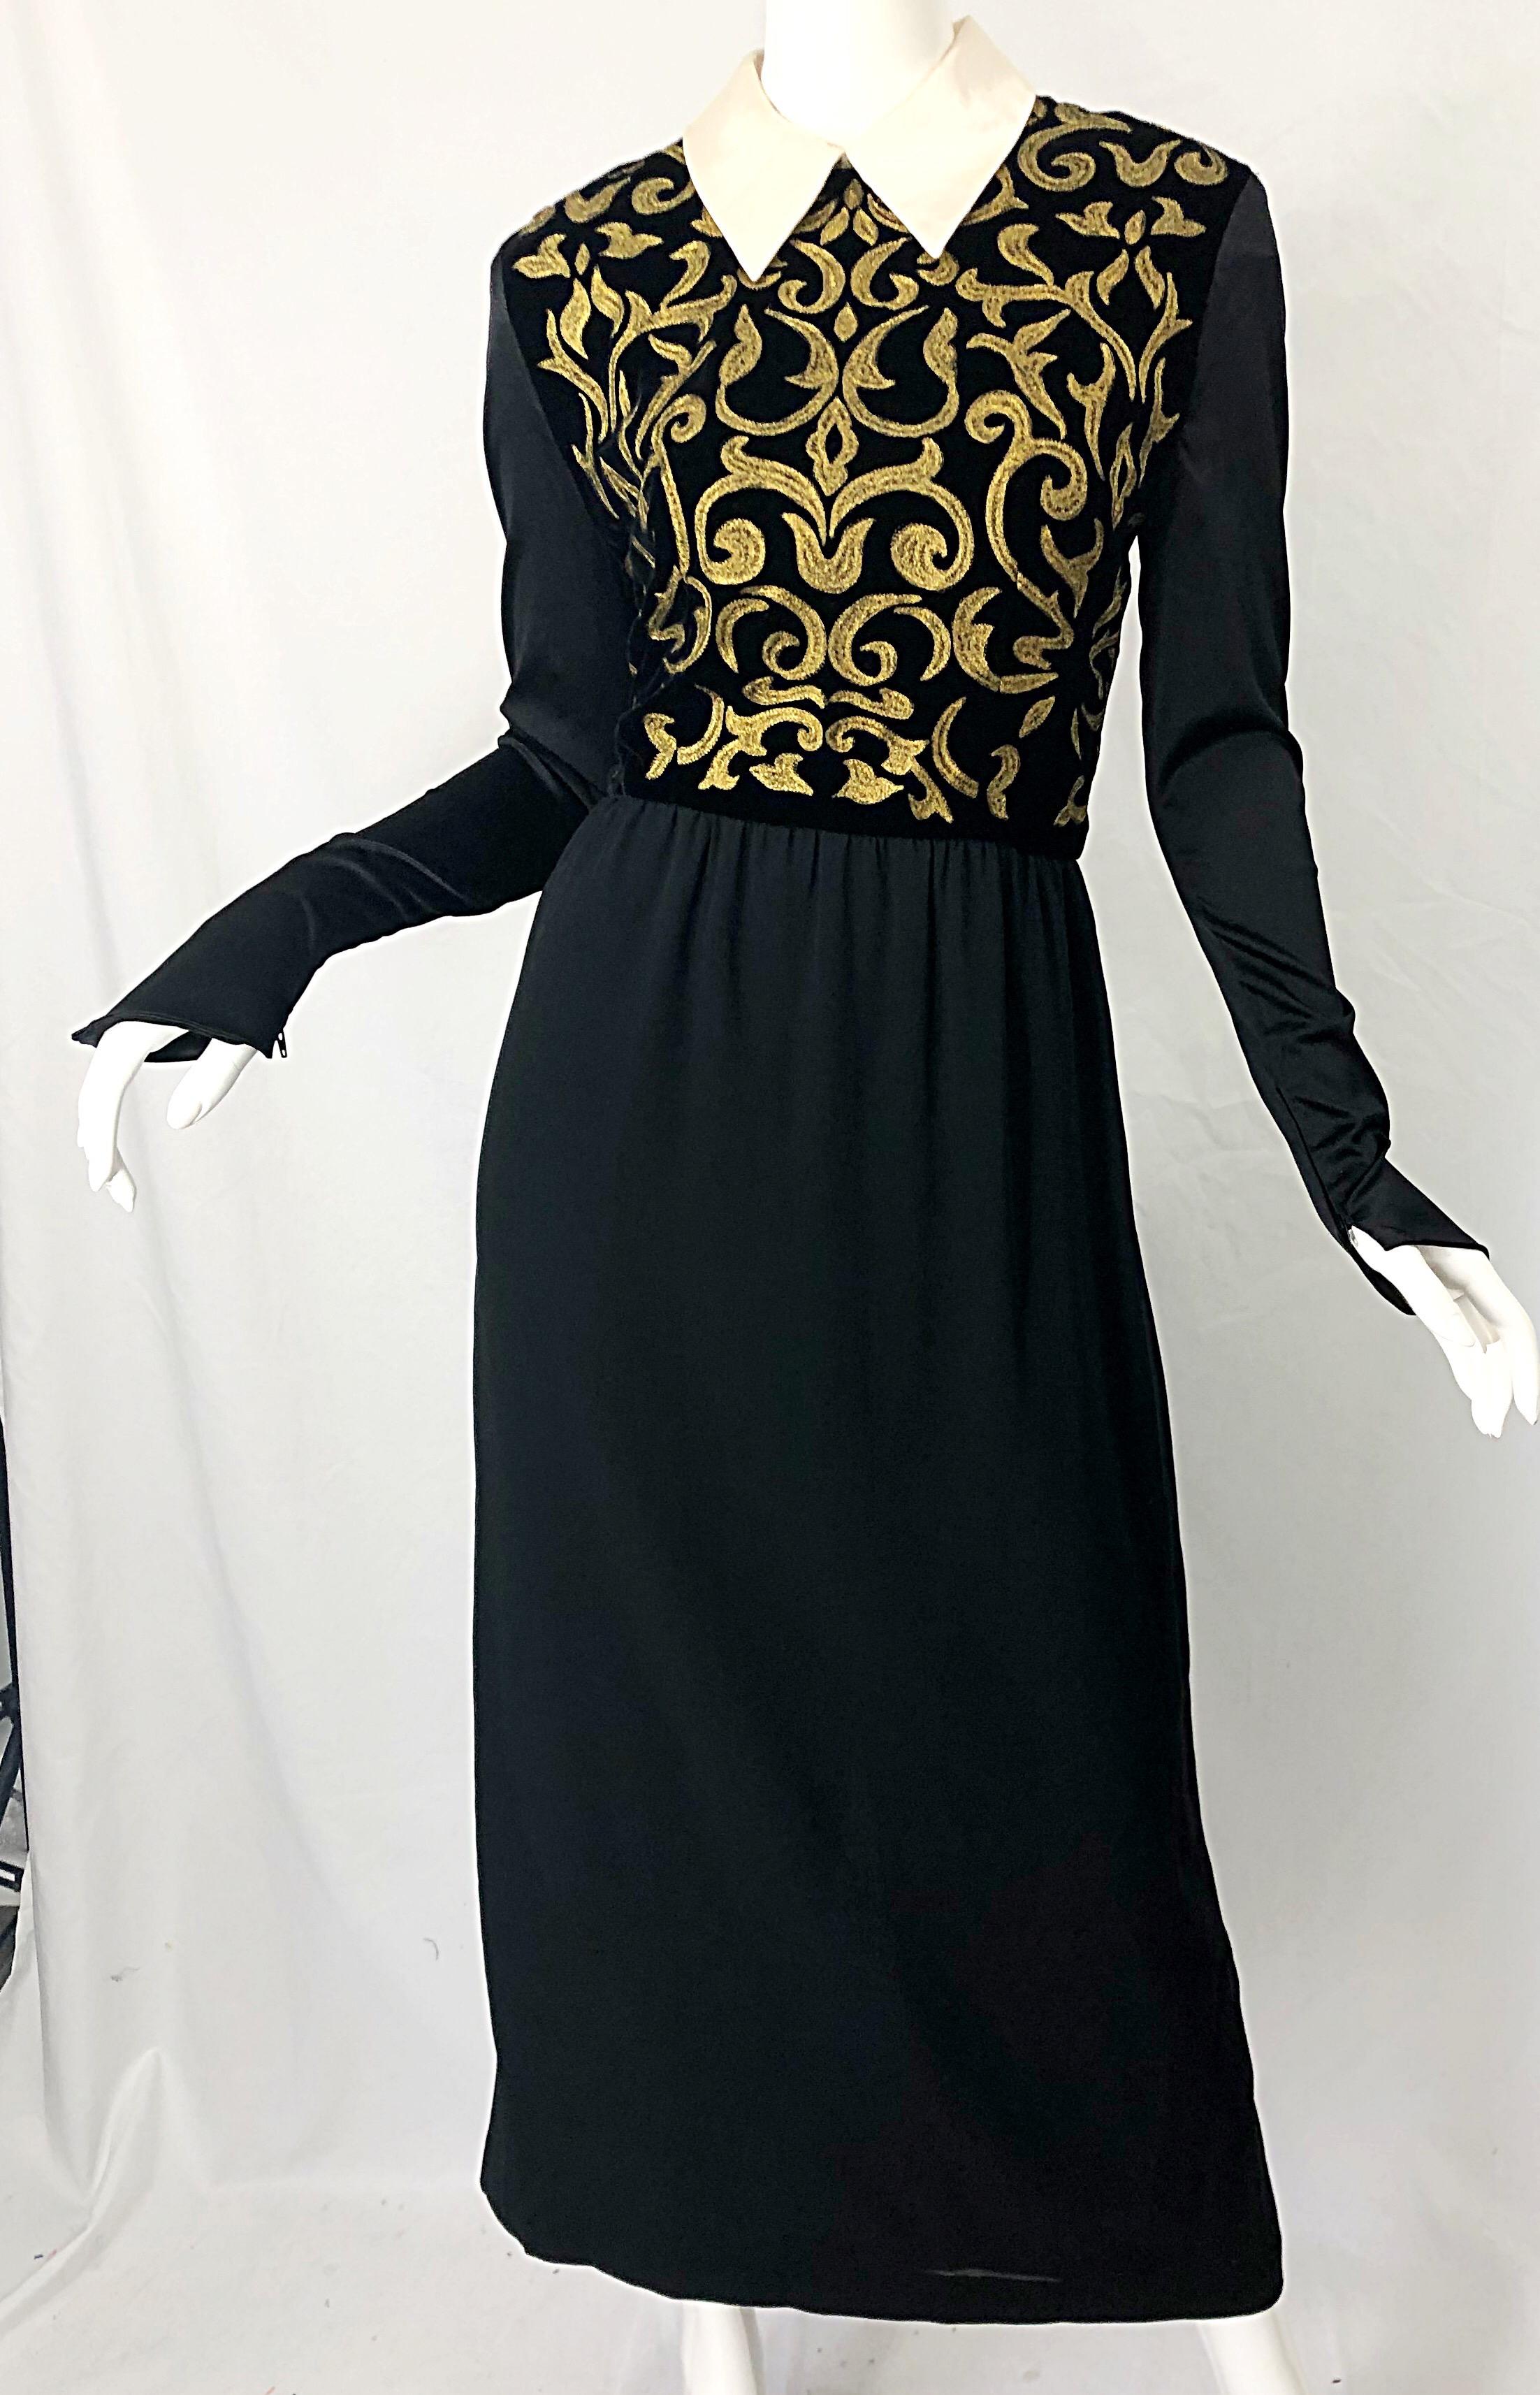 Karl Lagerfeld Runway Fall 1988 Black Gold Embroidered Vintage 80s Gown Dress For Sale 4